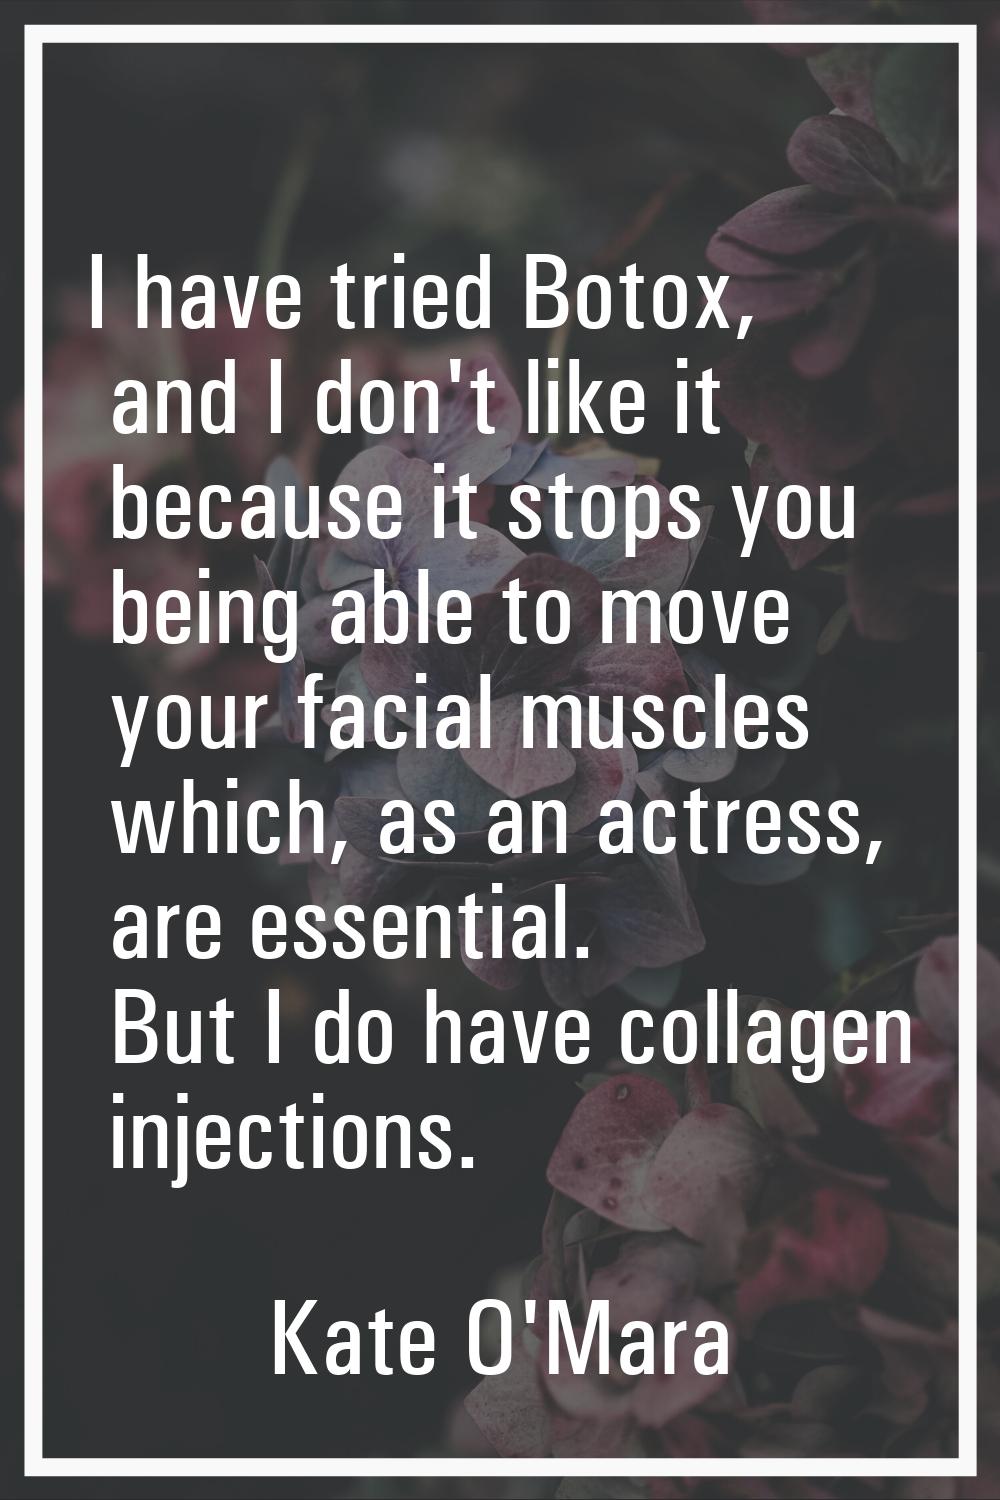 I have tried Botox, and I don't like it because it stops you being able to move your facial muscles